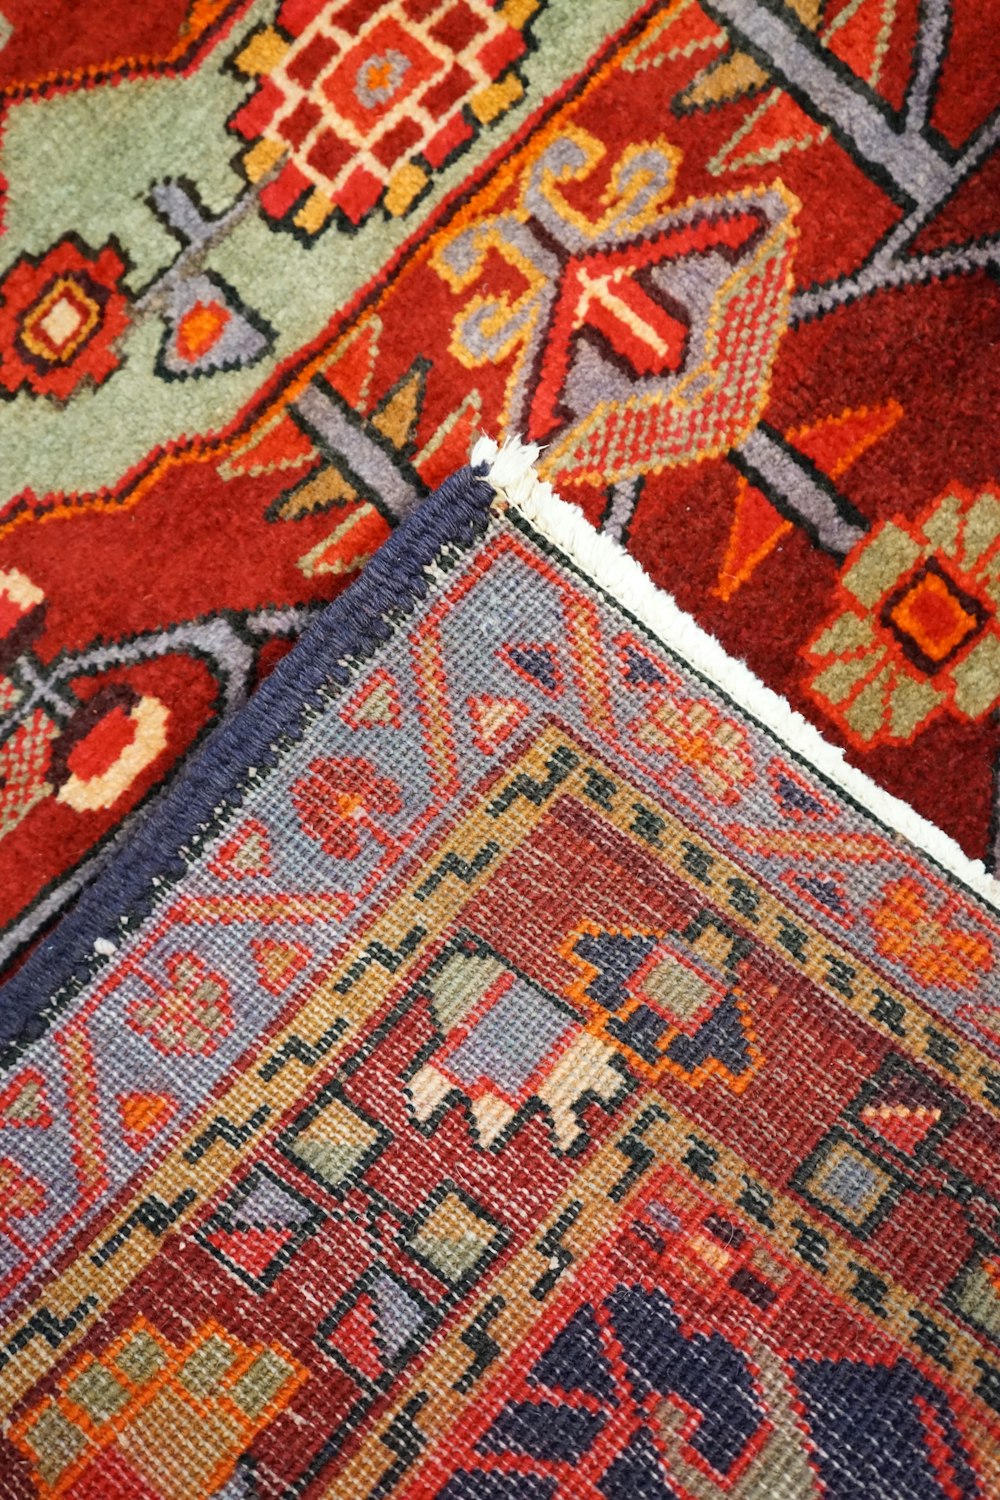 a close up of a rug with different colors